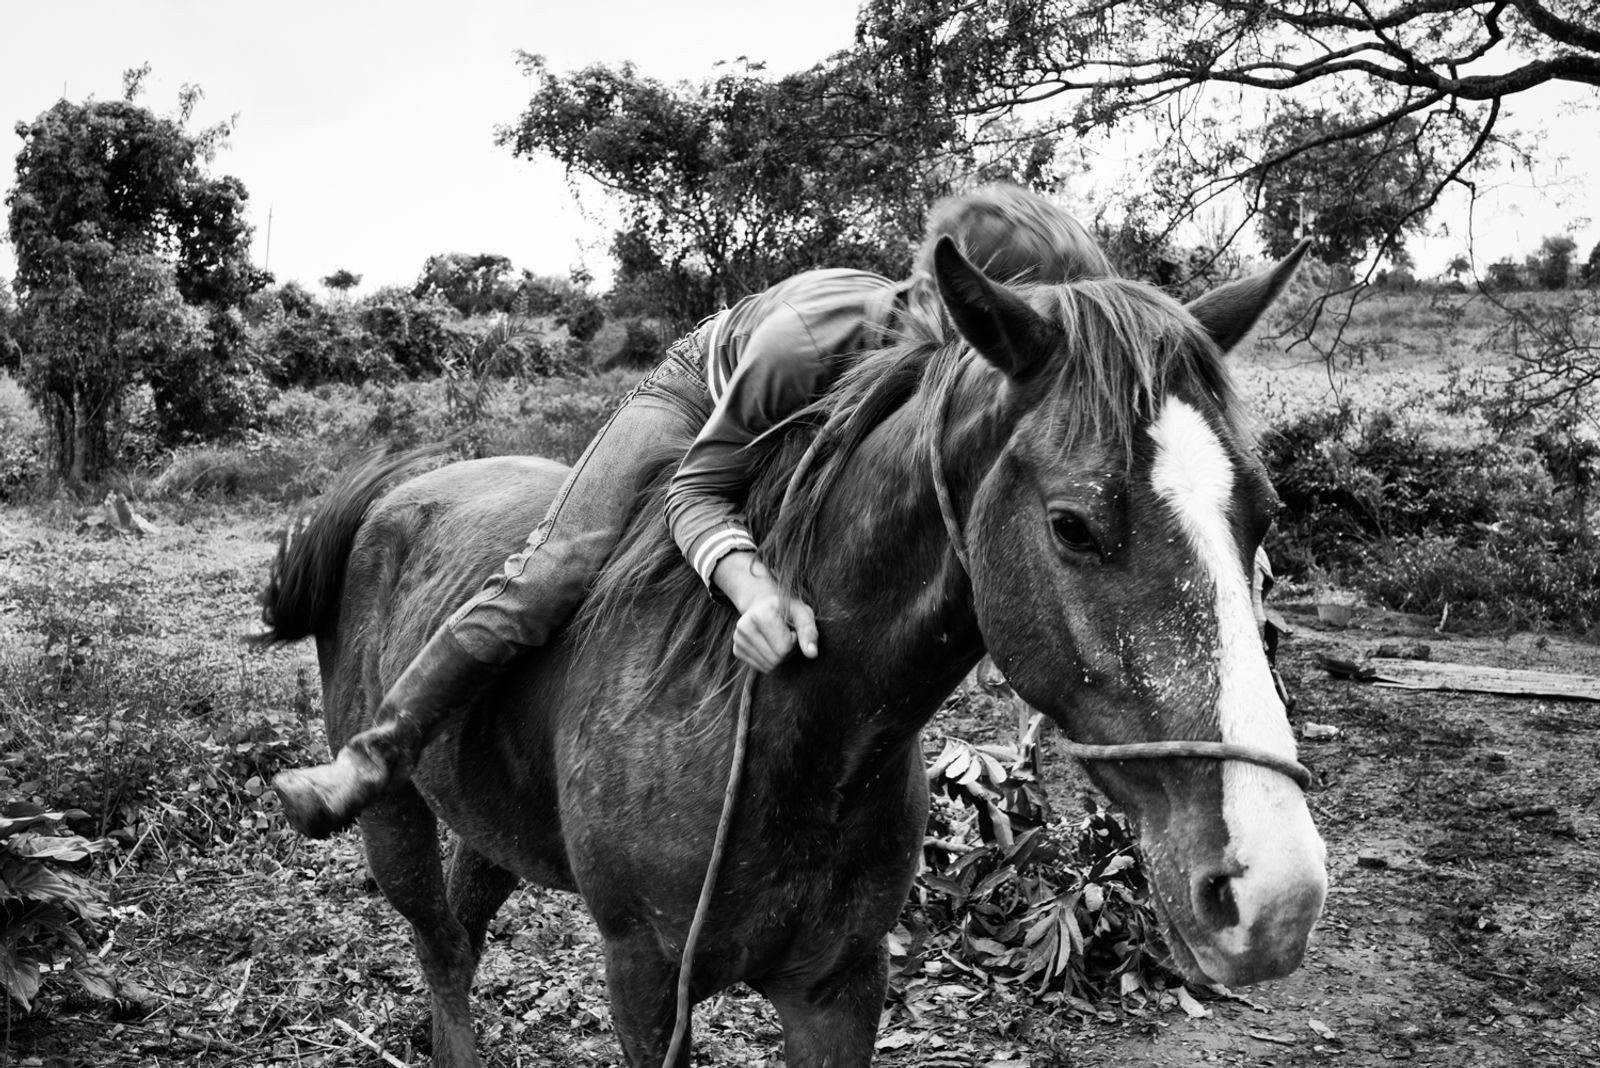 © Richard Andrew Sharum - Image from the TIERRA CUBA photography project